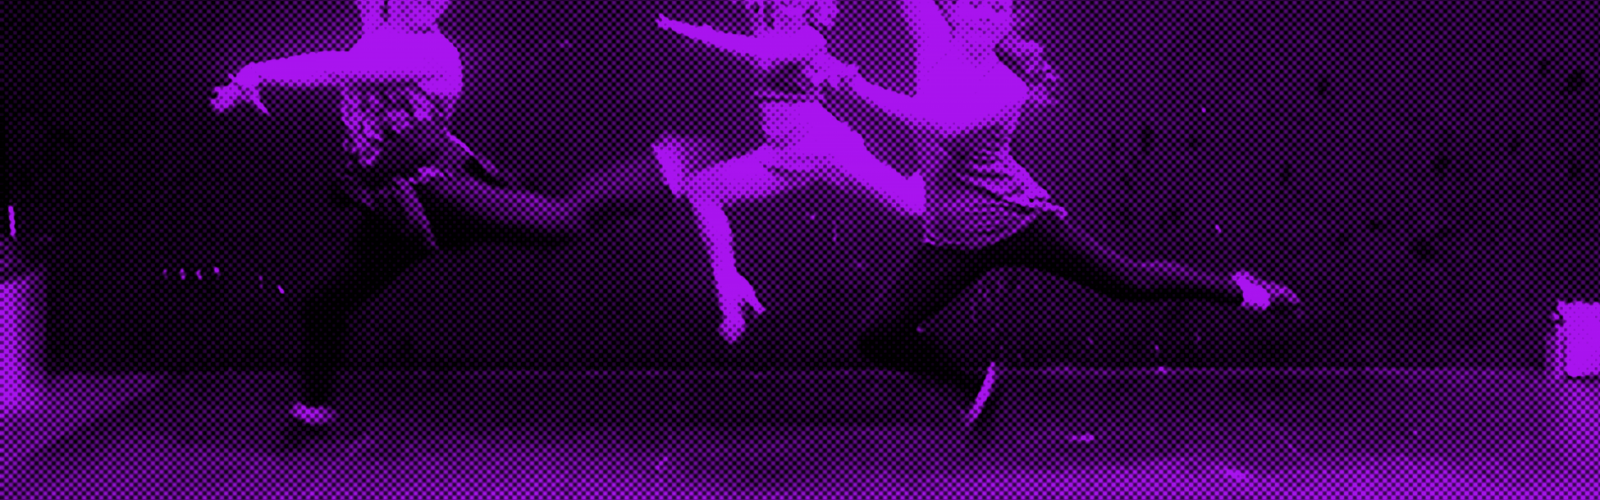 Three dancers leaping in sync beneath a heavy purple photo filter